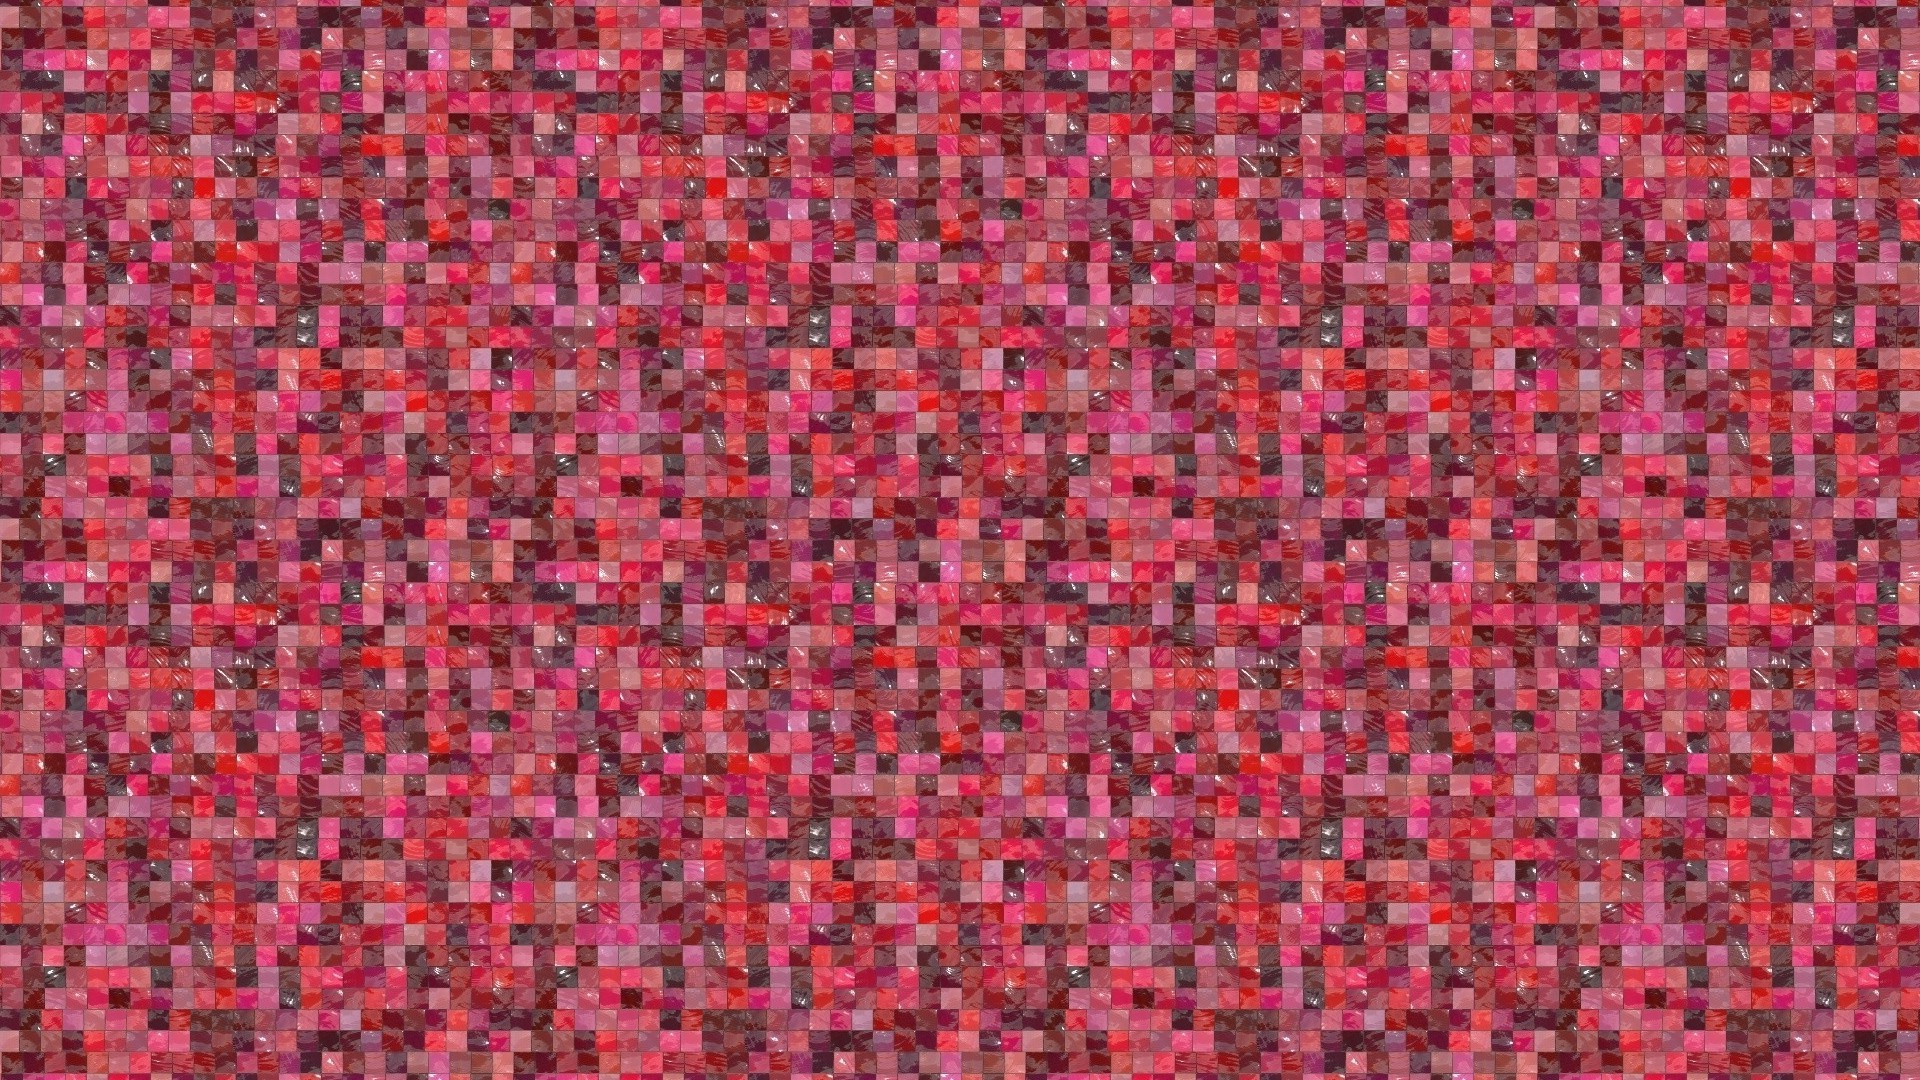 texture, Pattern, Mosaic, Square, Abstract, Pink Wallpaper